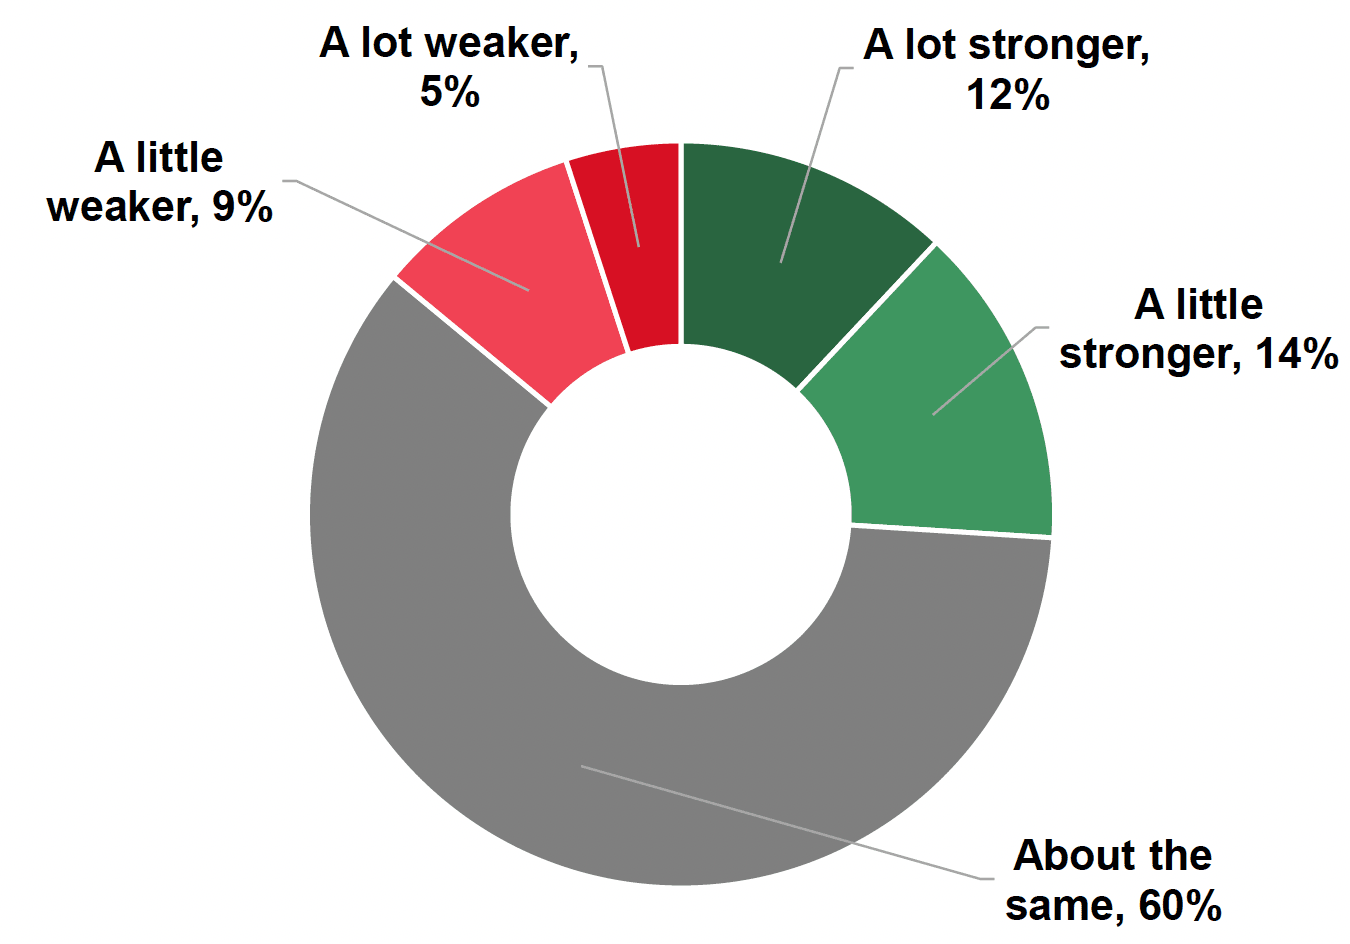 Pie chart showing that 26% say their relationships with family members are stronger, 14% weaker and 60% about the same